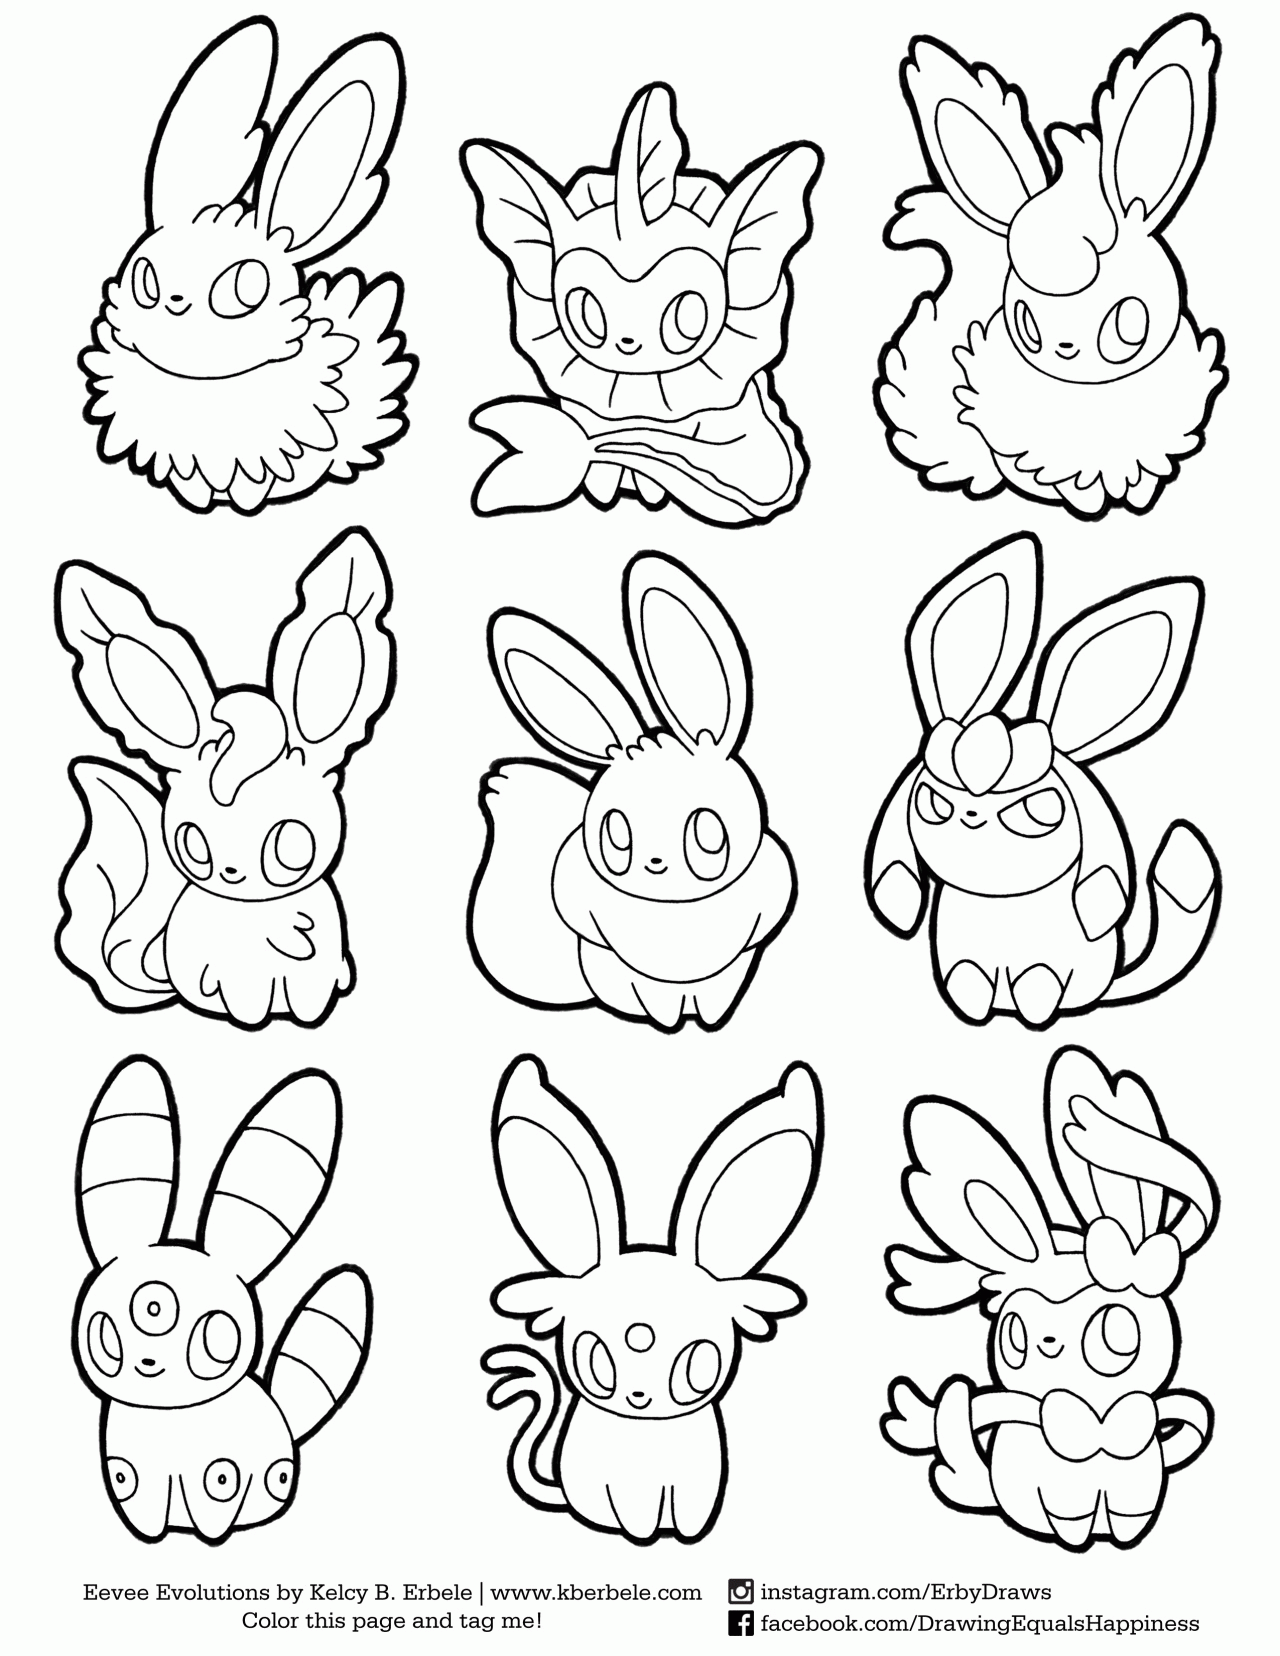 Eeveelution coloring page! The file is on my... - Drawing = Happiness